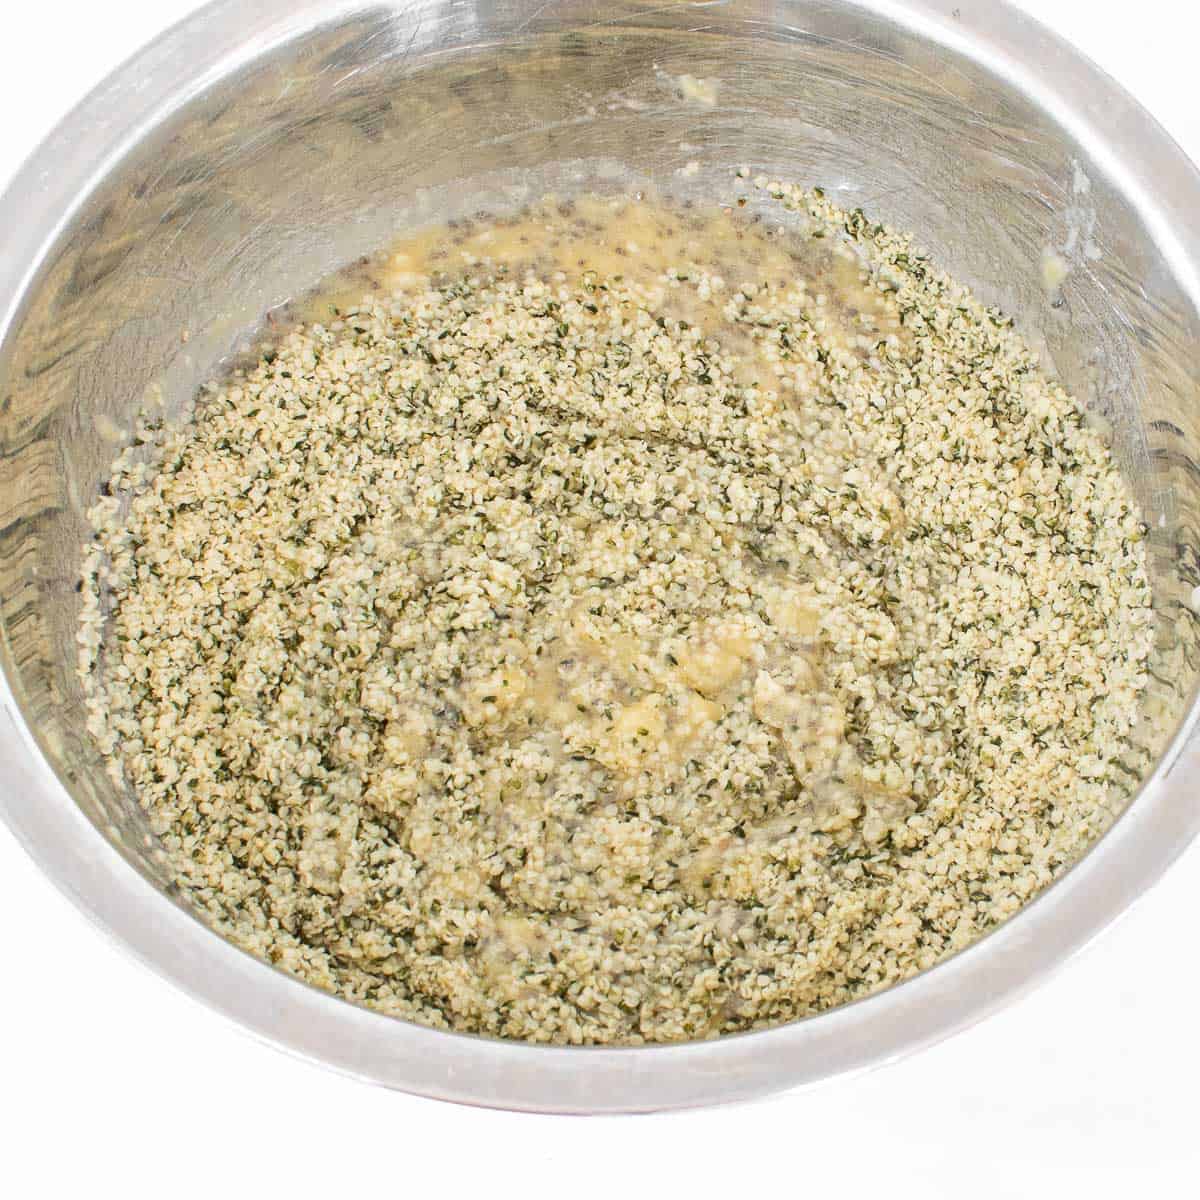 hempseeds stirred in the same mixing bowl. 